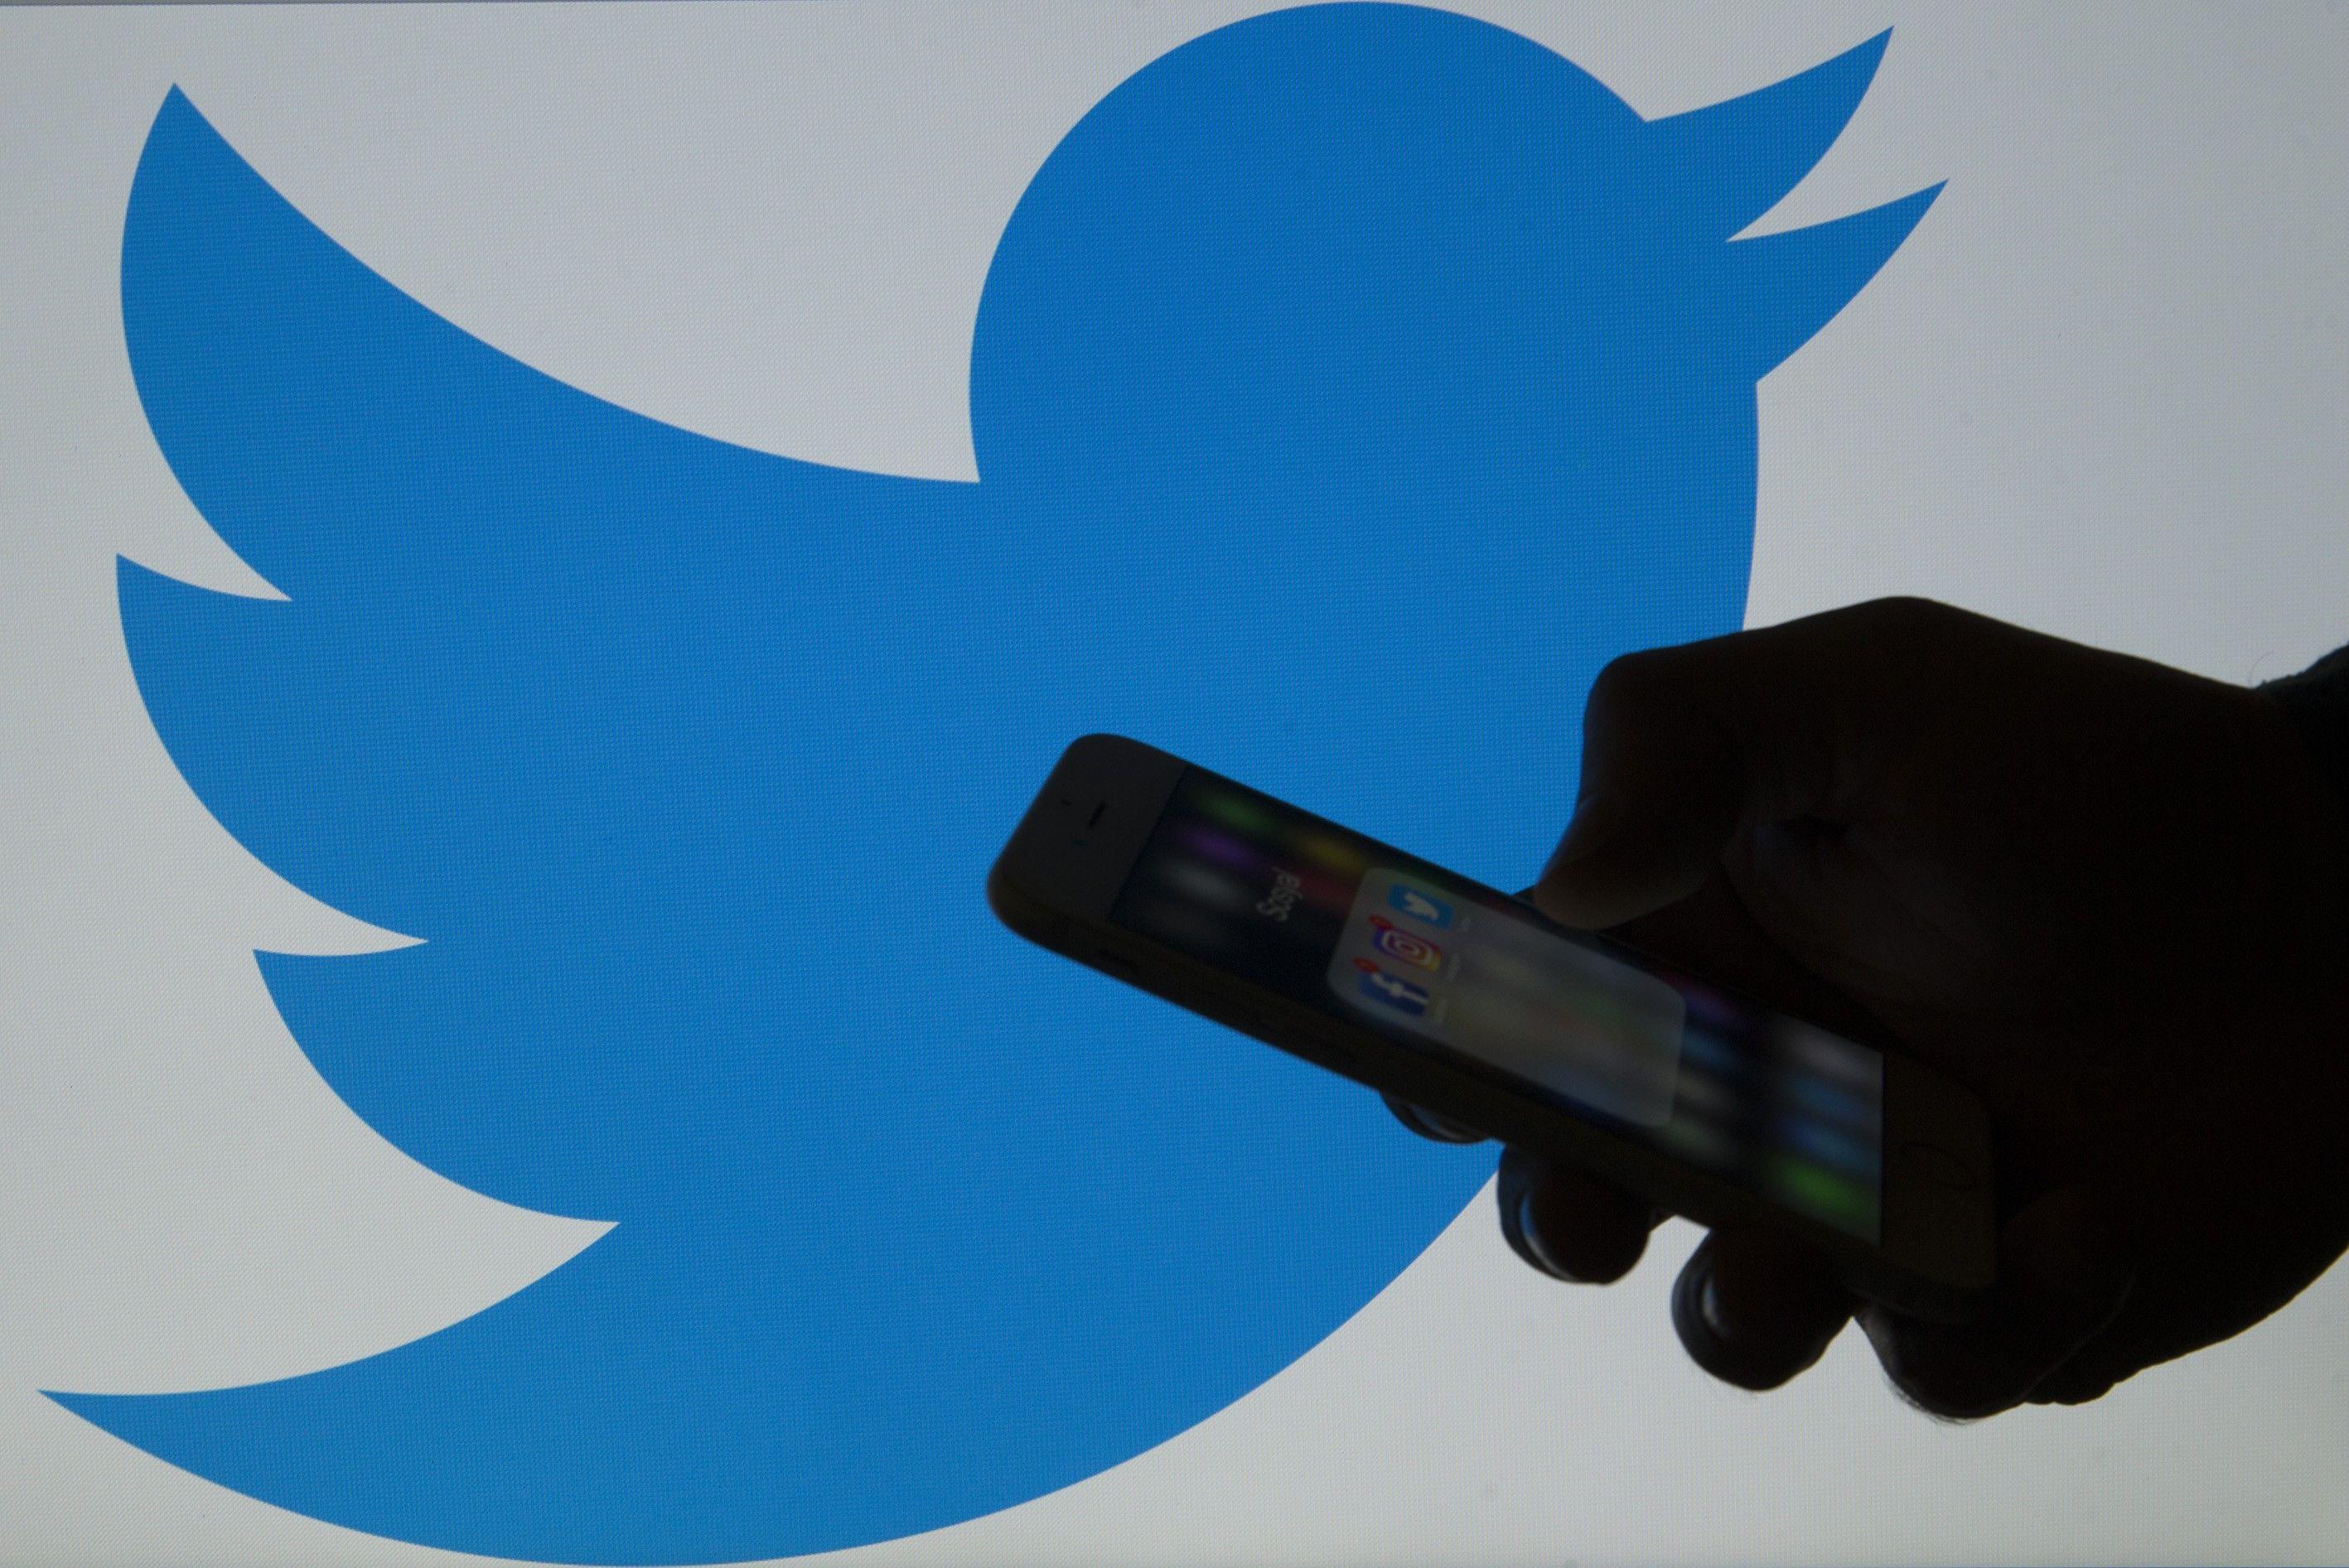 Twitter's Logo - Twitter Finds 200 Accounts Linked to Russian Agents | Time